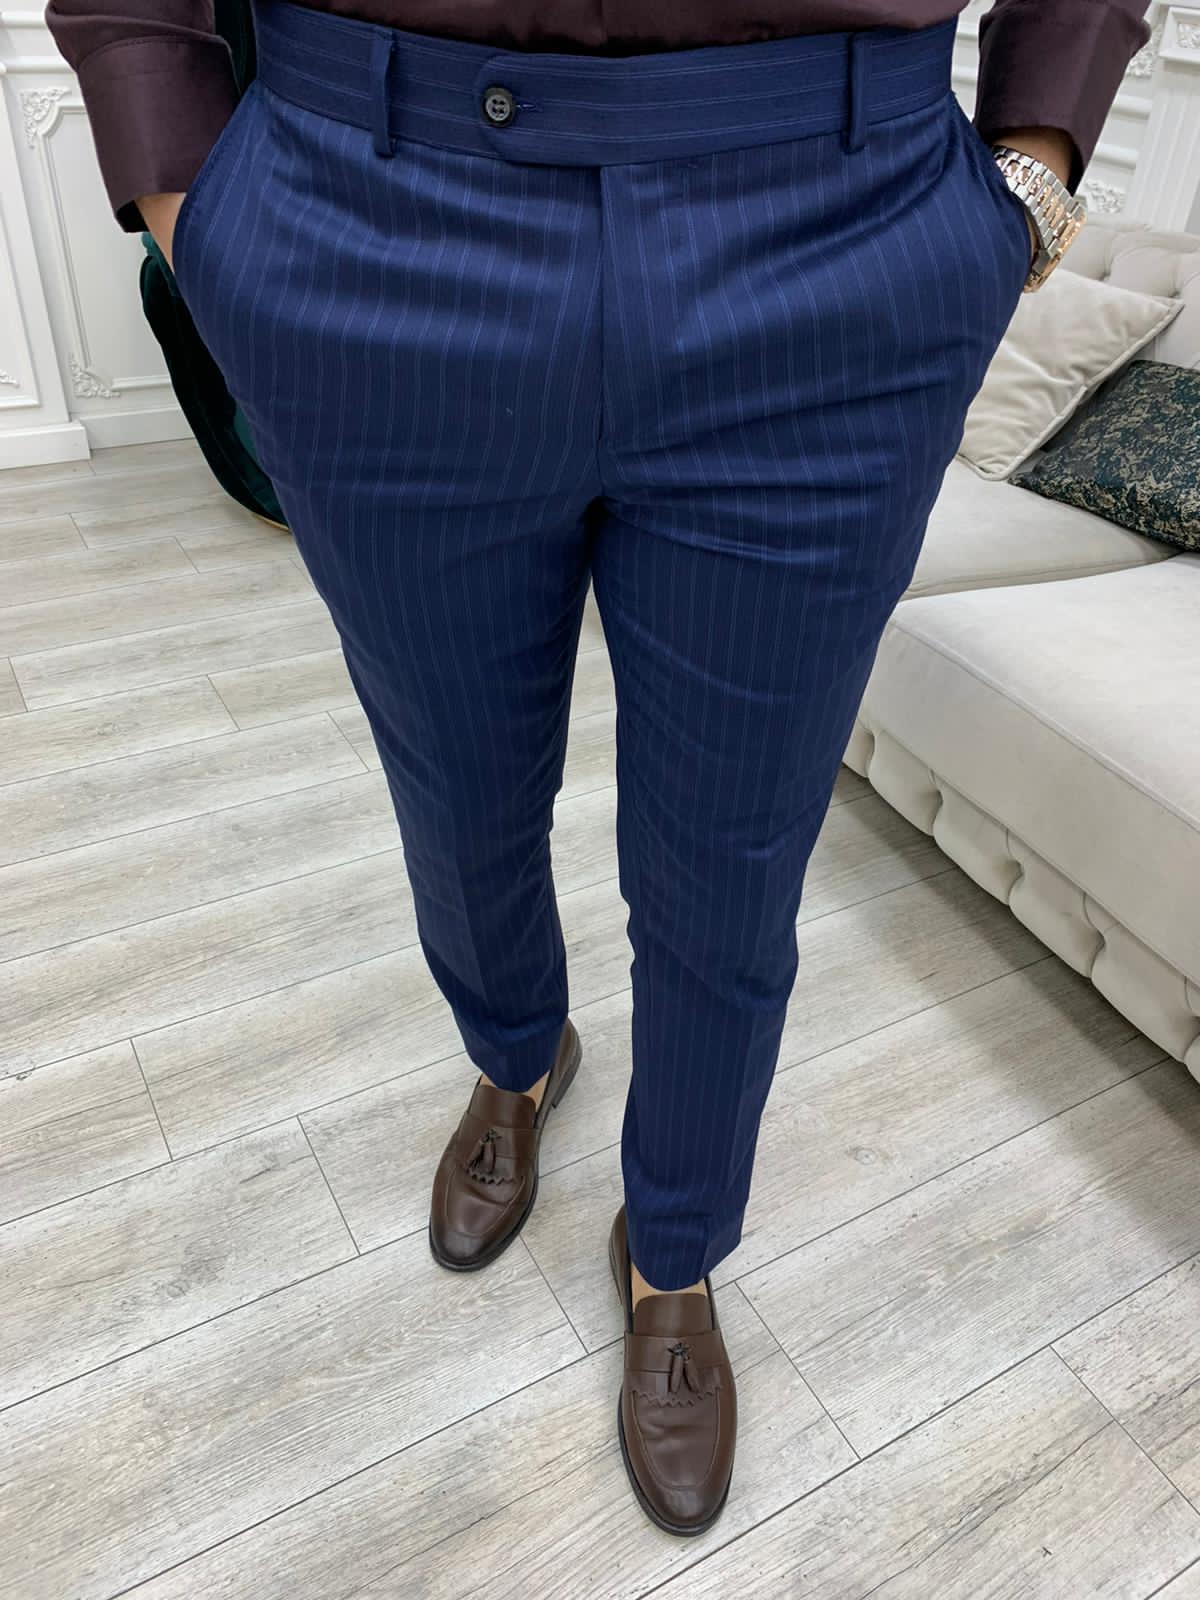 Navy Blue Double Breasted Striped Suit